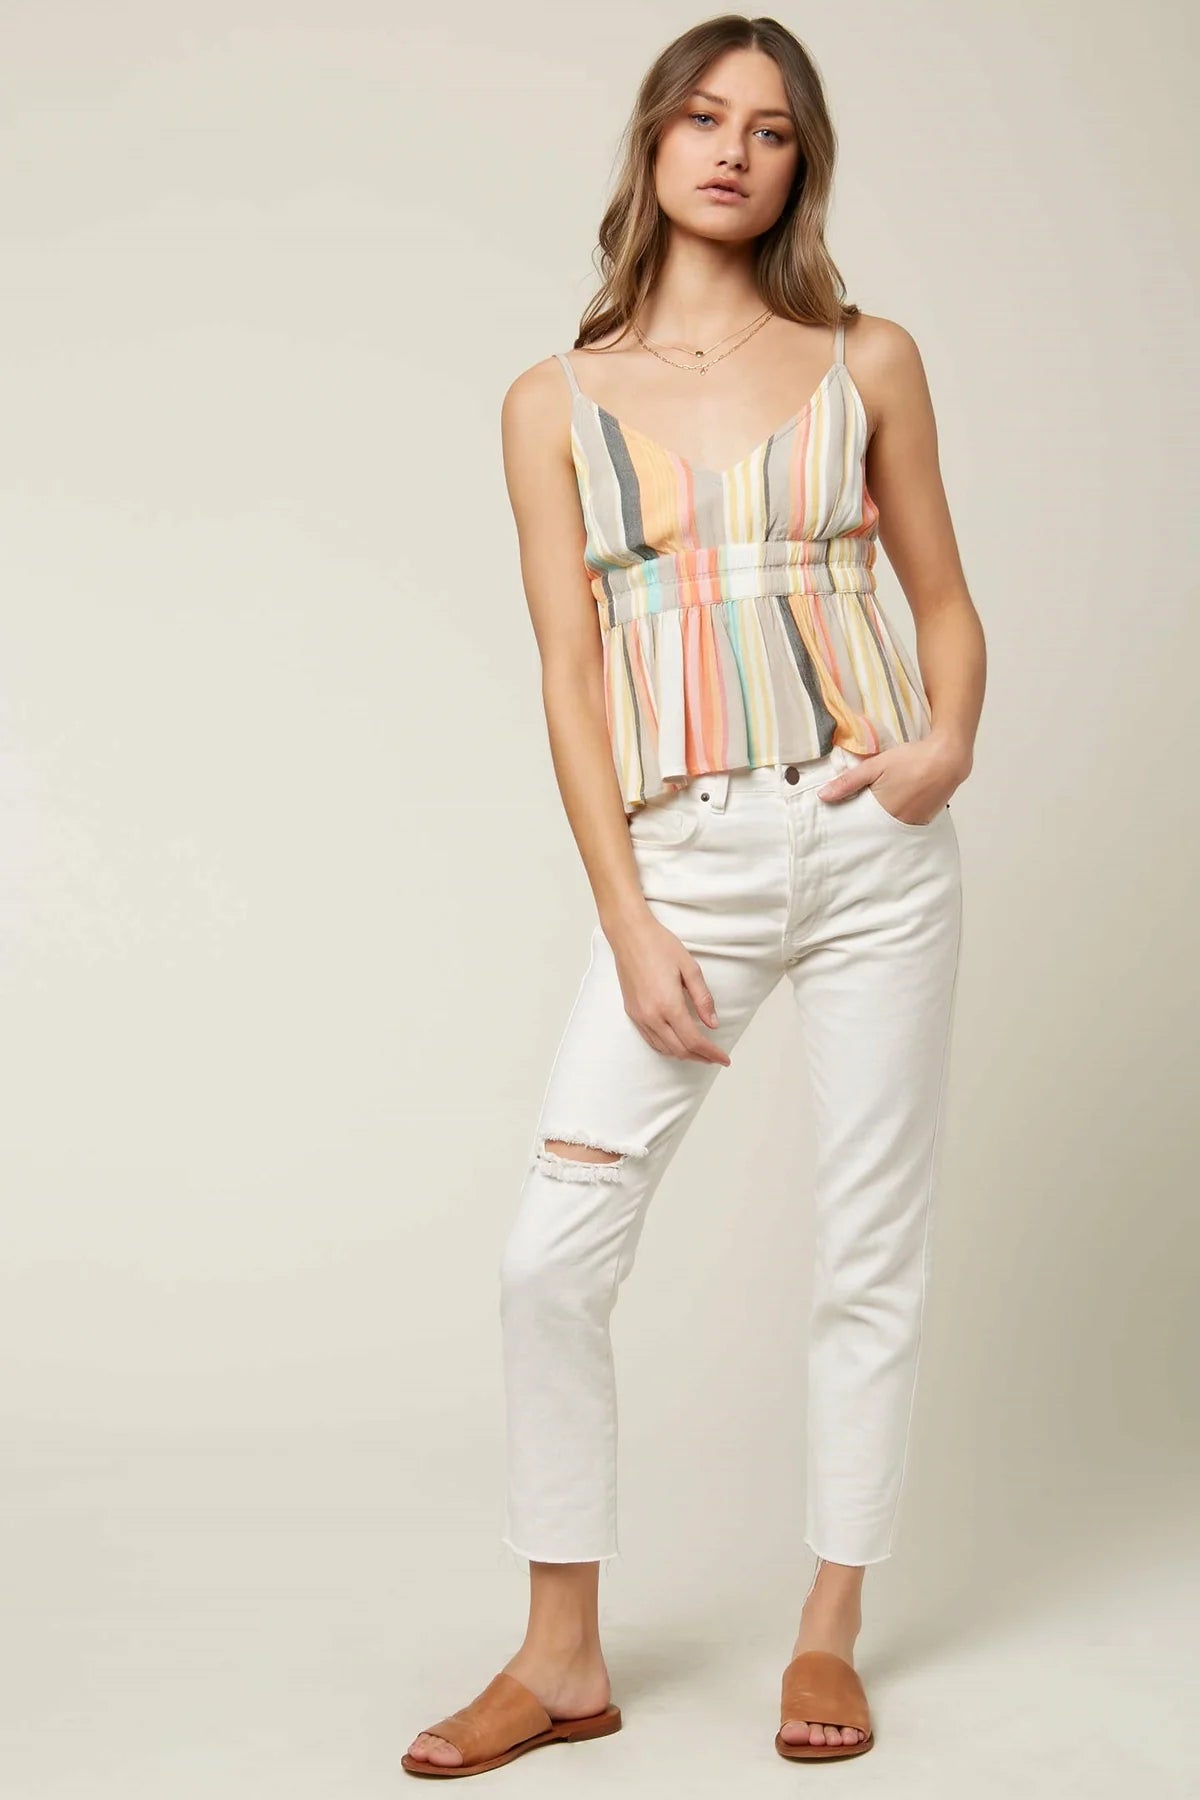 O'Neill Kelby Stripe Top (Non-Current)